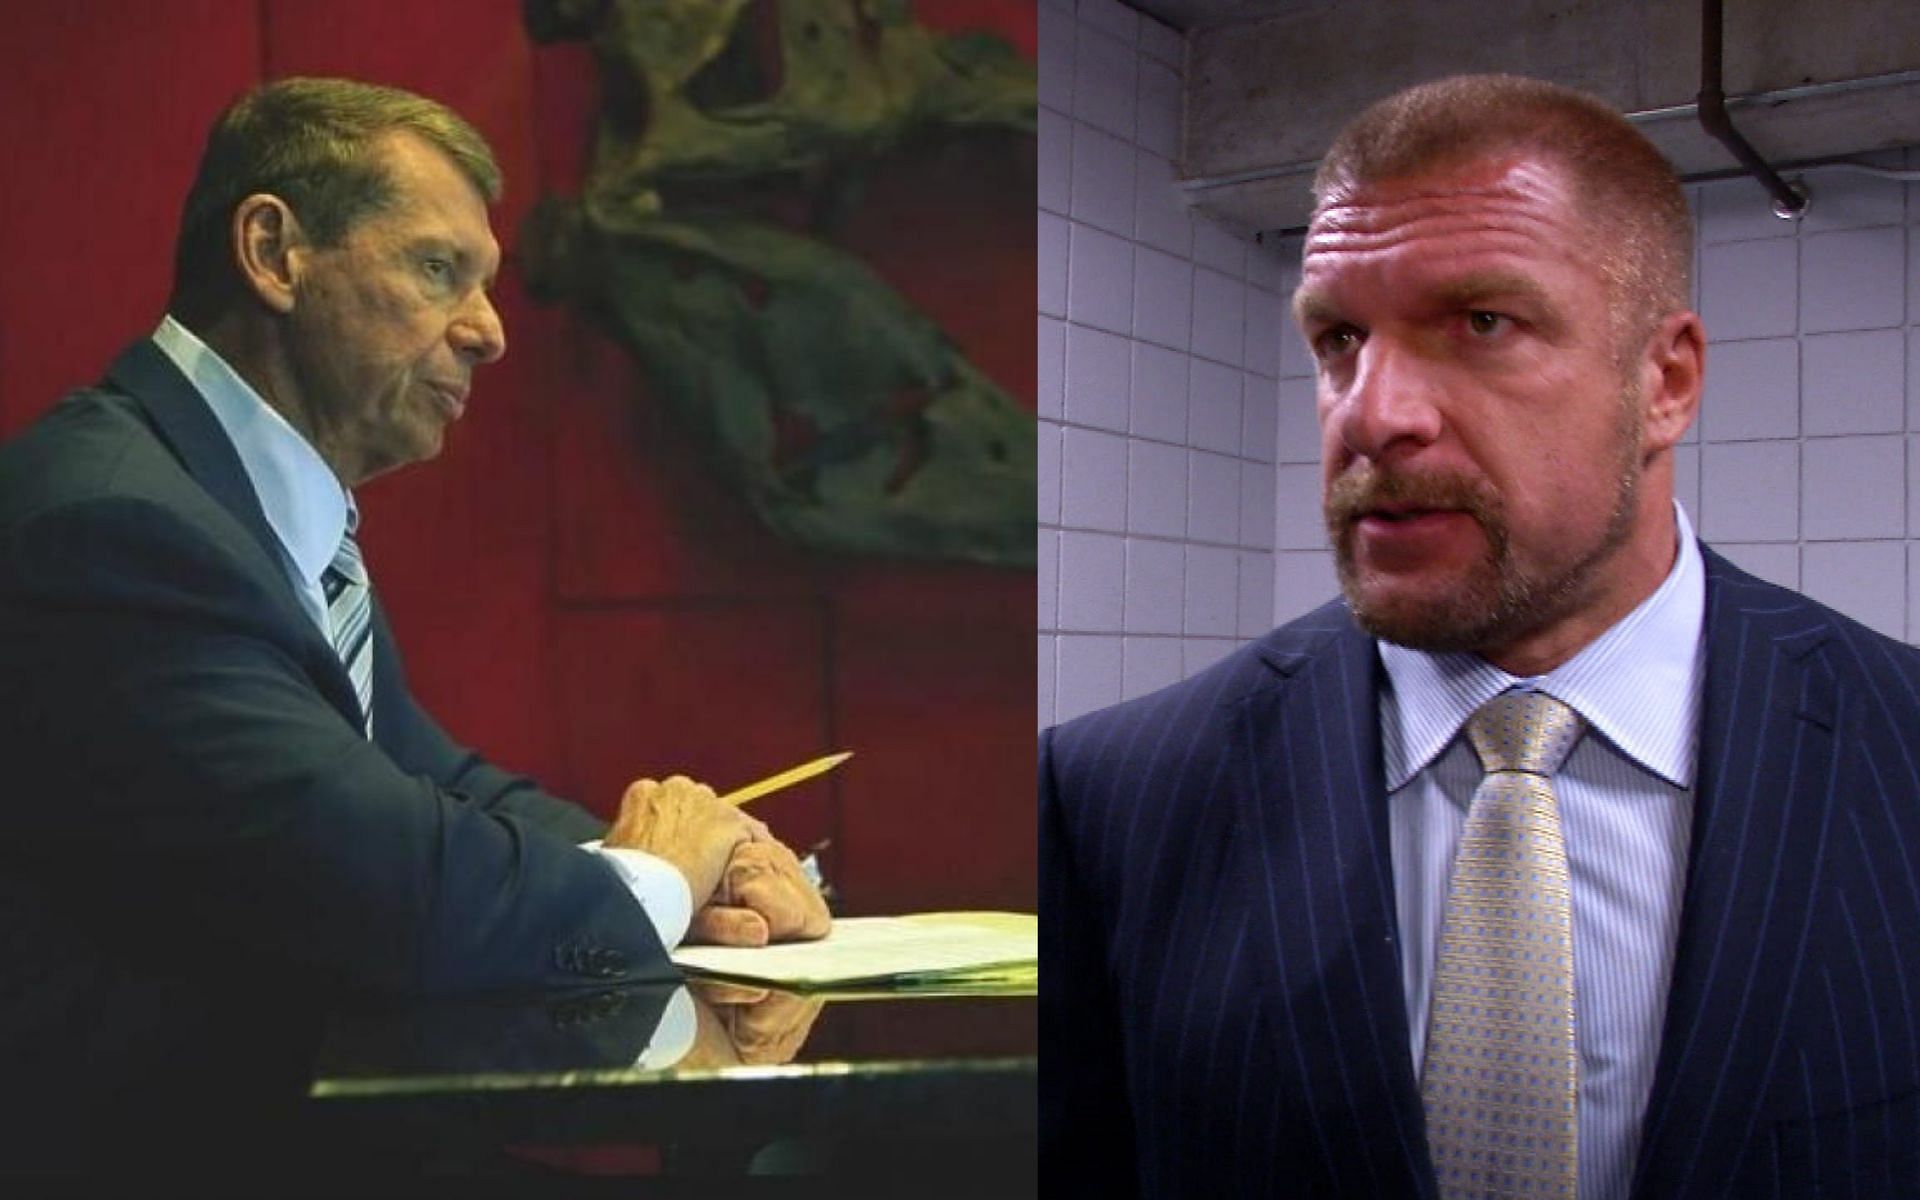 WWE personalities, Triple H and Vince McMahon